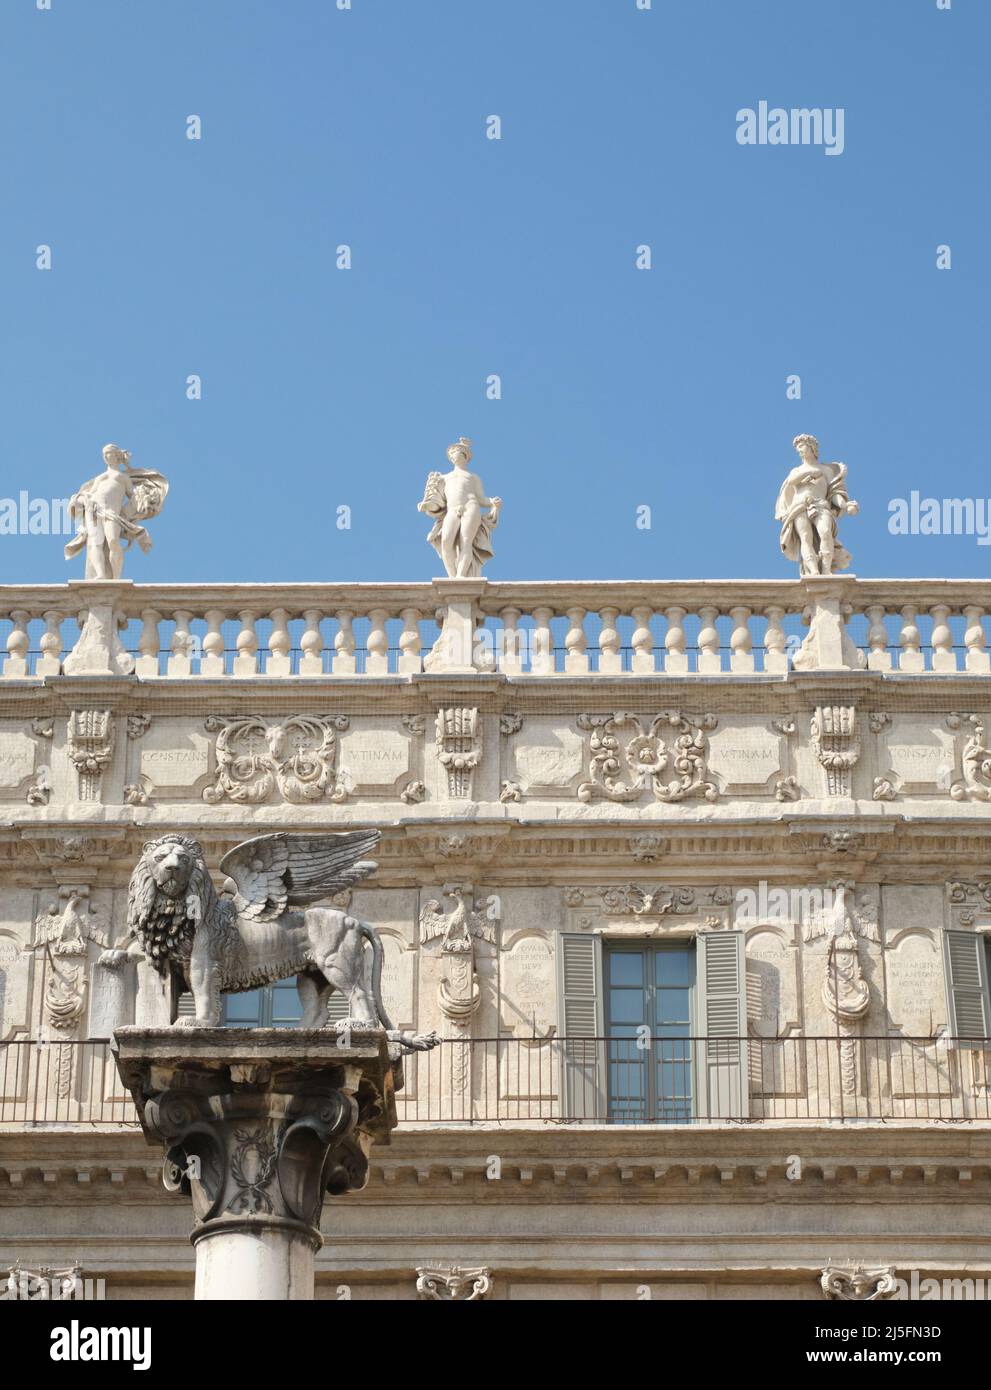 Traditional symbol of the Venetian Empire, a winged lion with a book, sculpted and standing in front of an elaborate building. Stock Photo